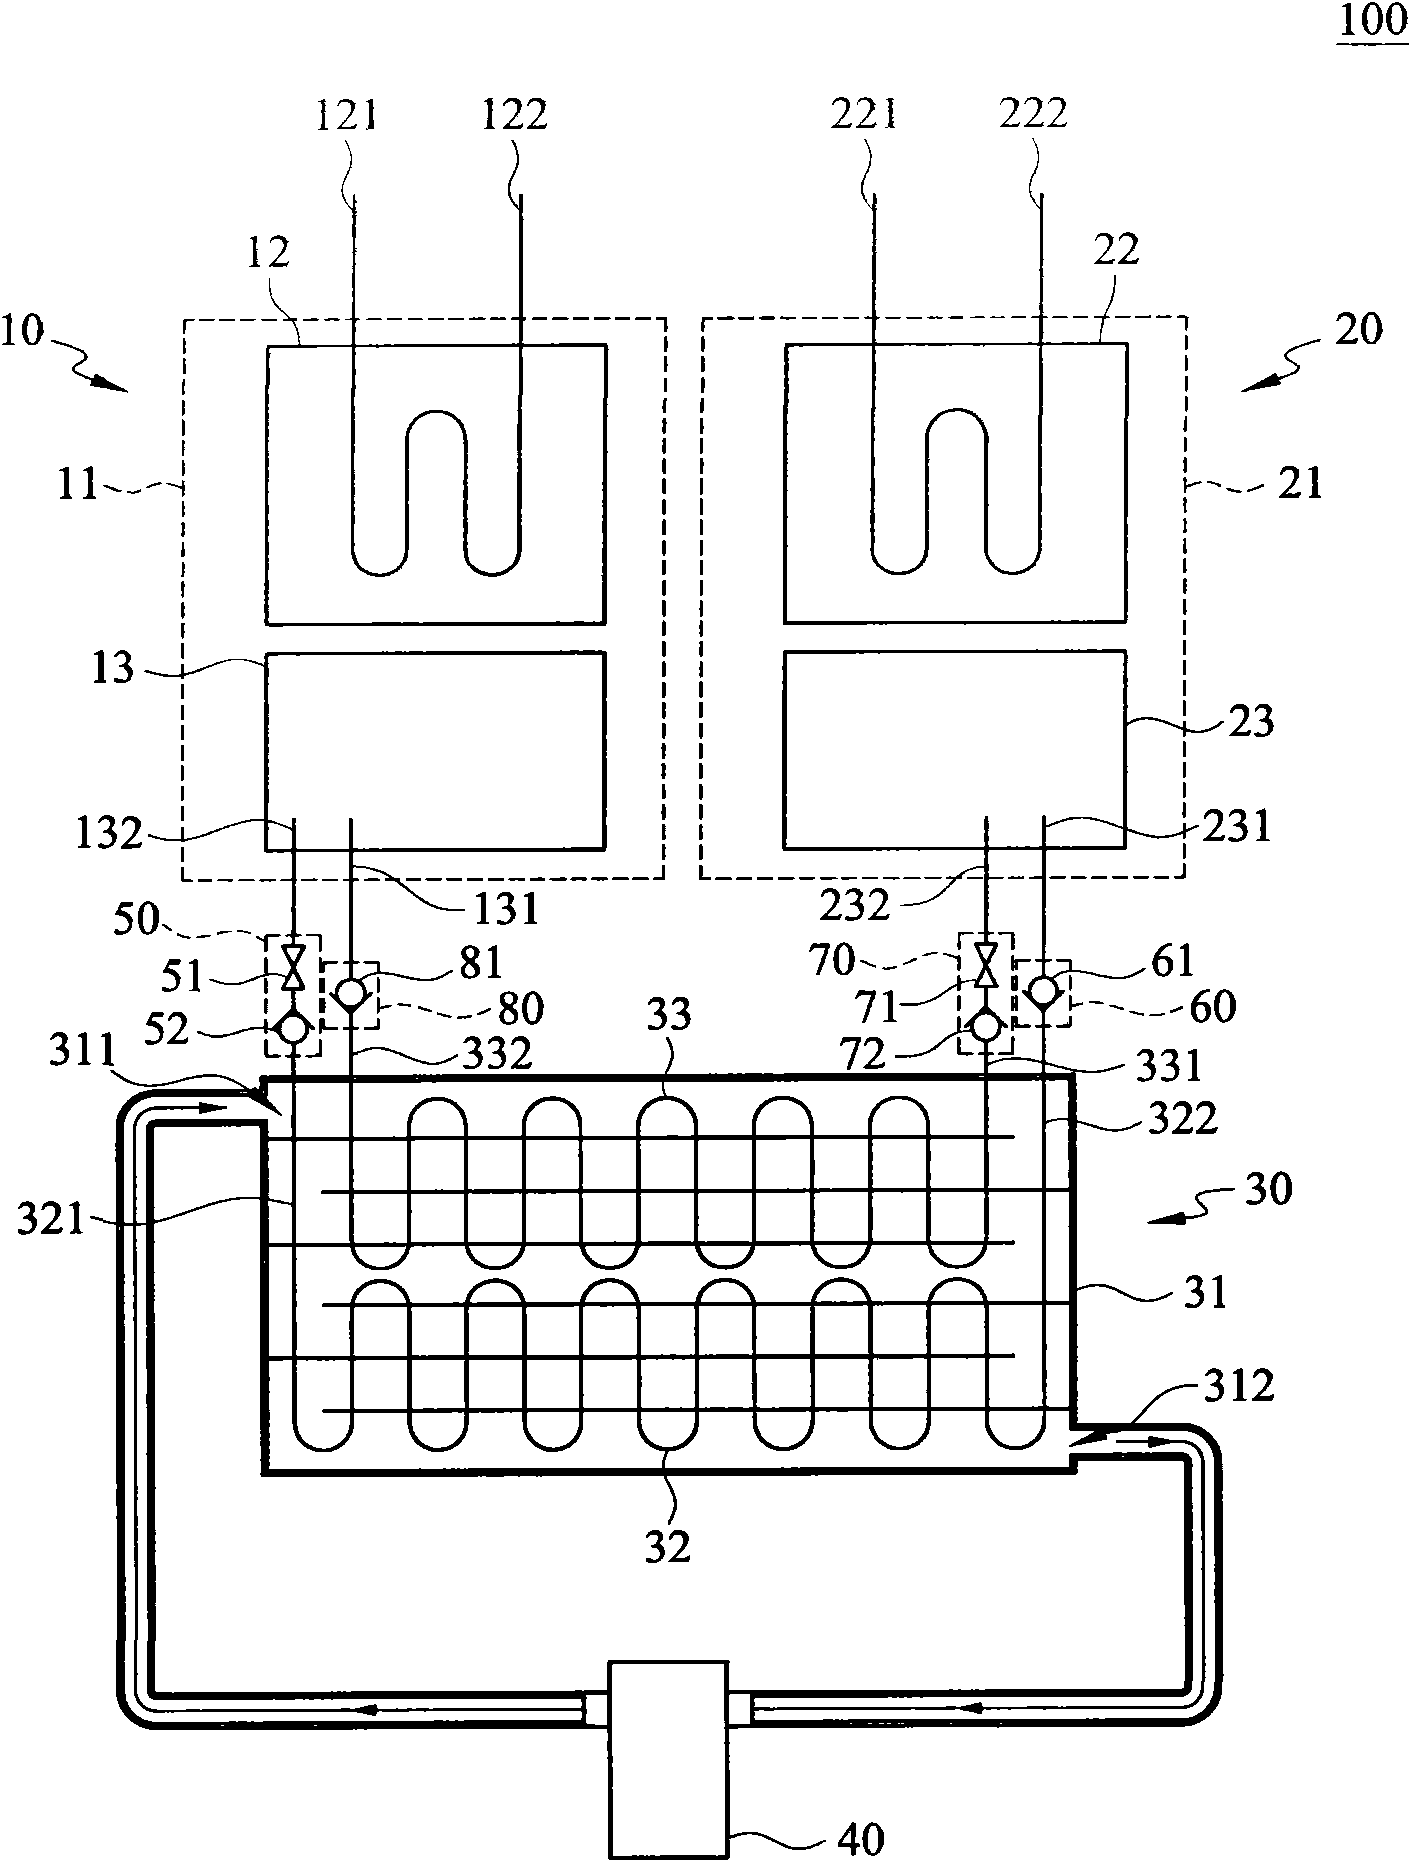 Separated solid-adsorption-type refrigerating system